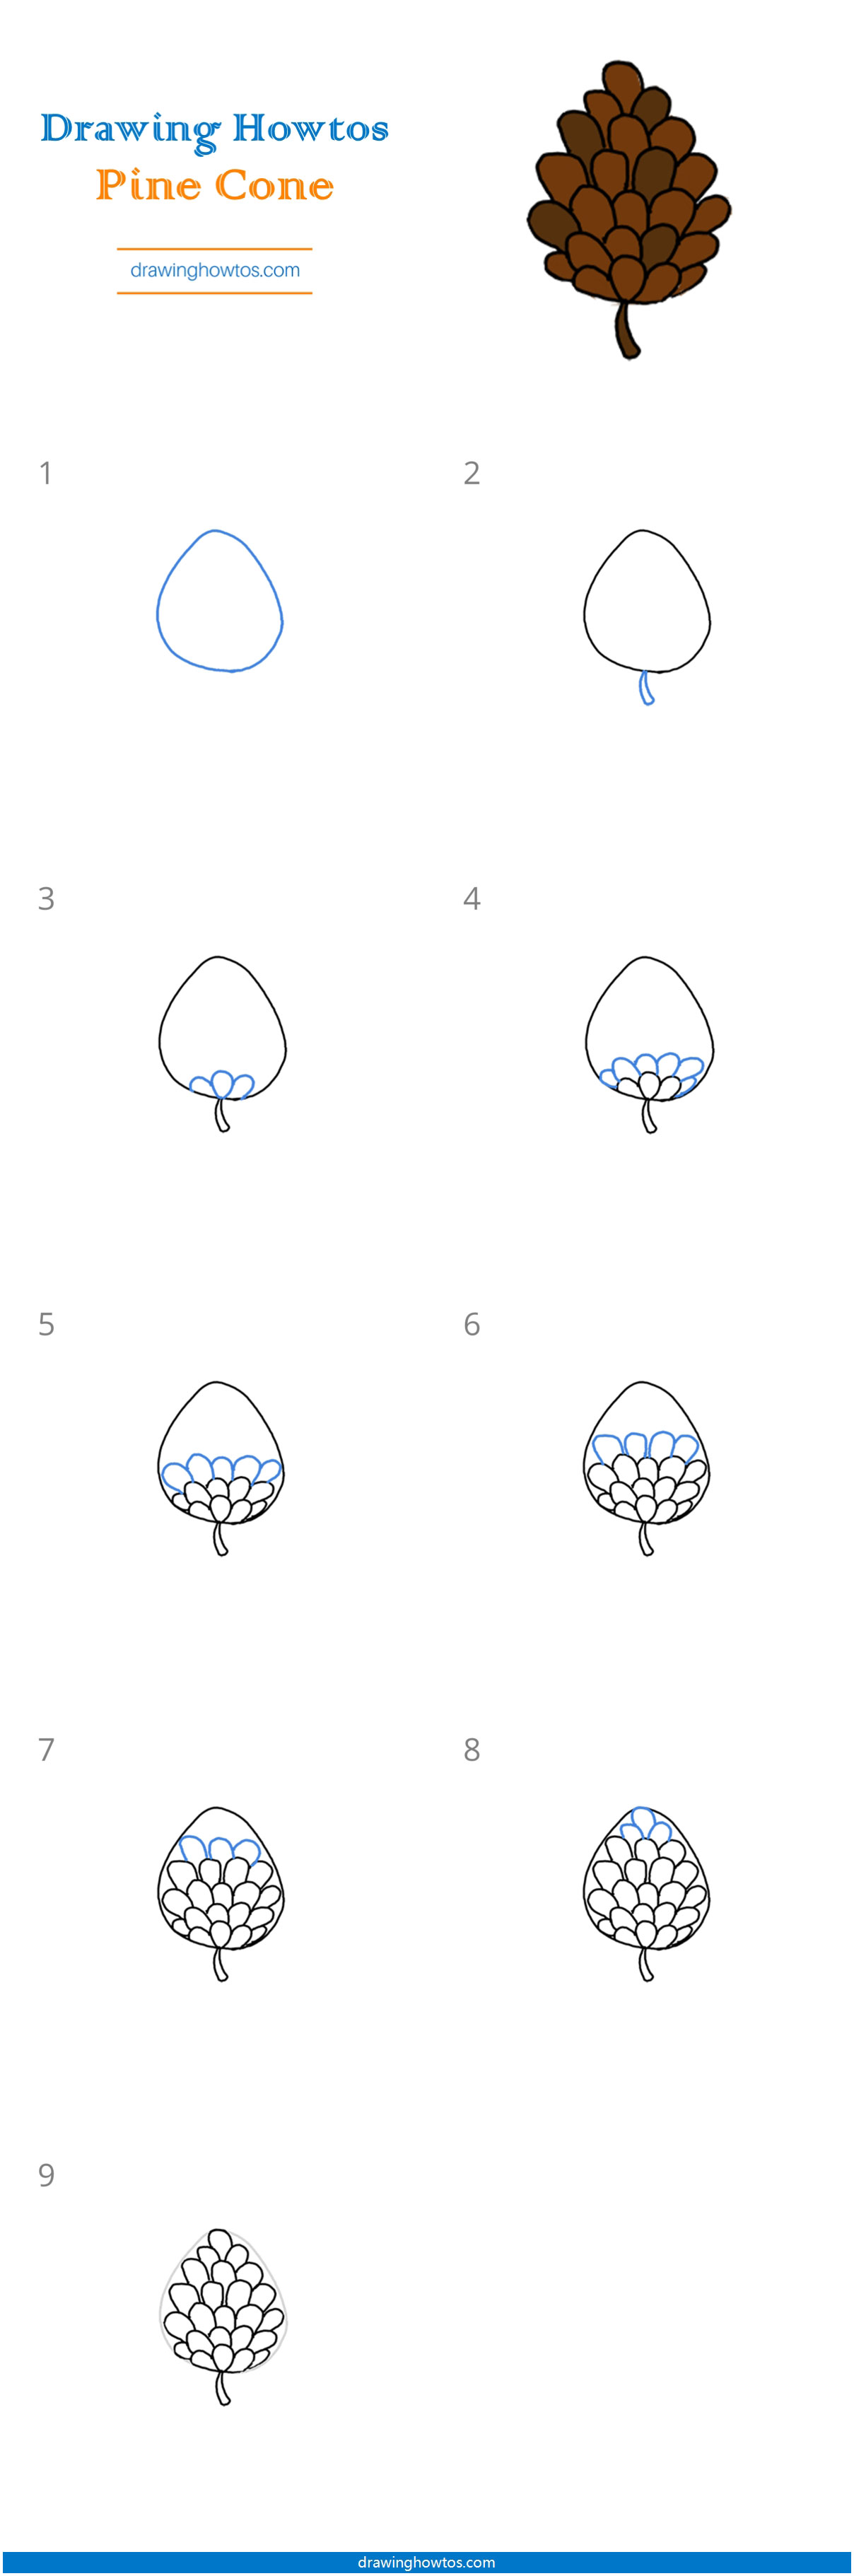 How to Draw a Pine Cone Step by Step